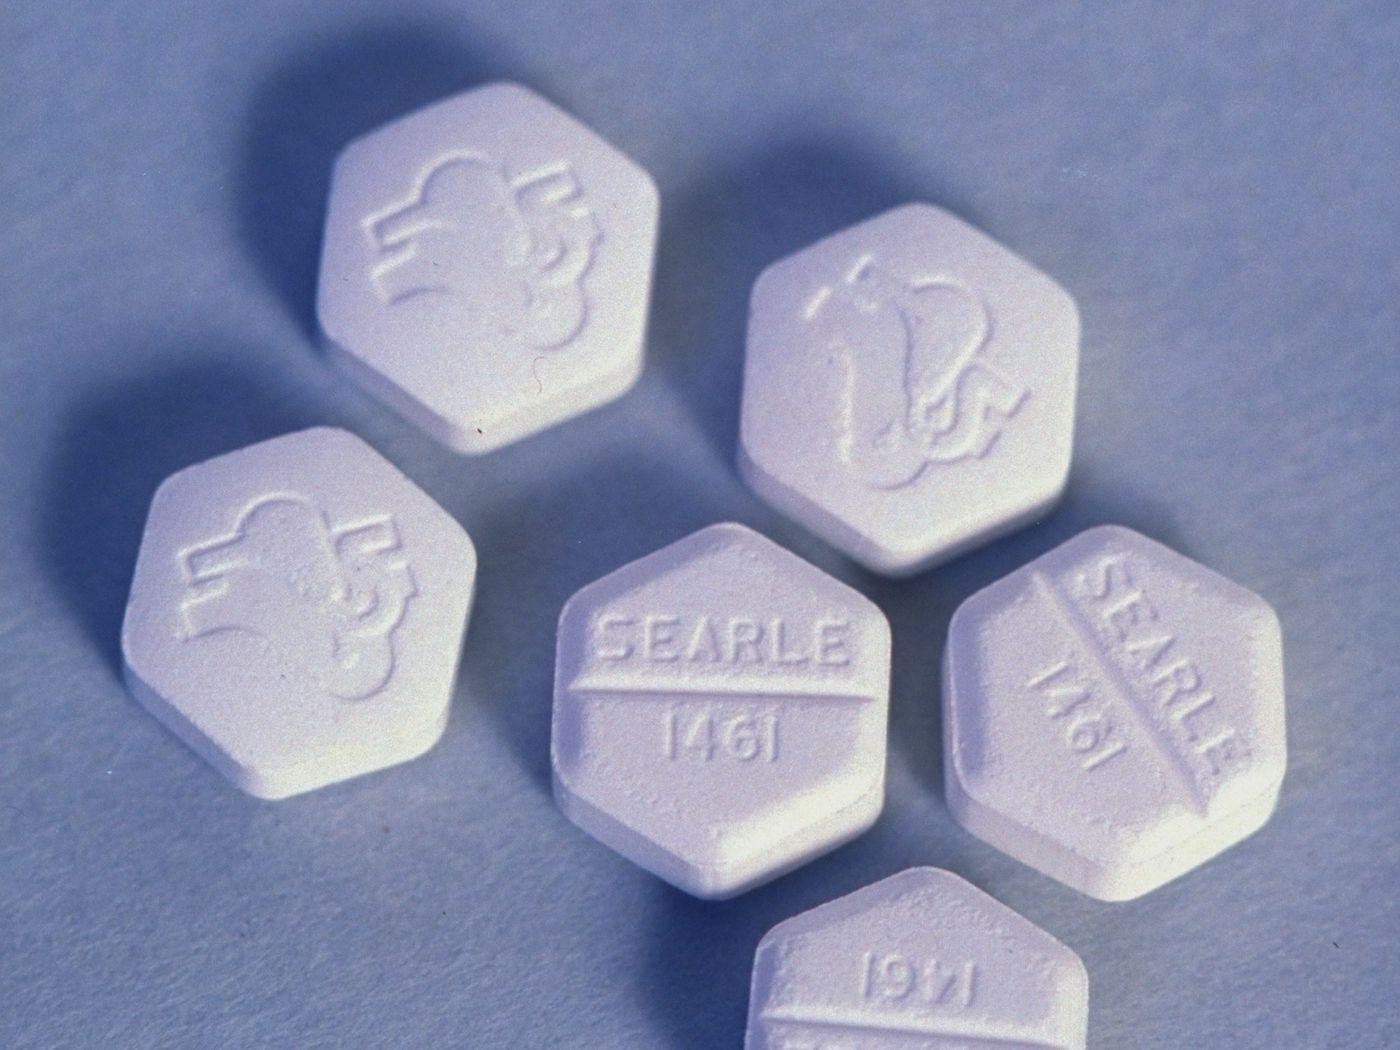 FDA targets online abortion pill providers selling